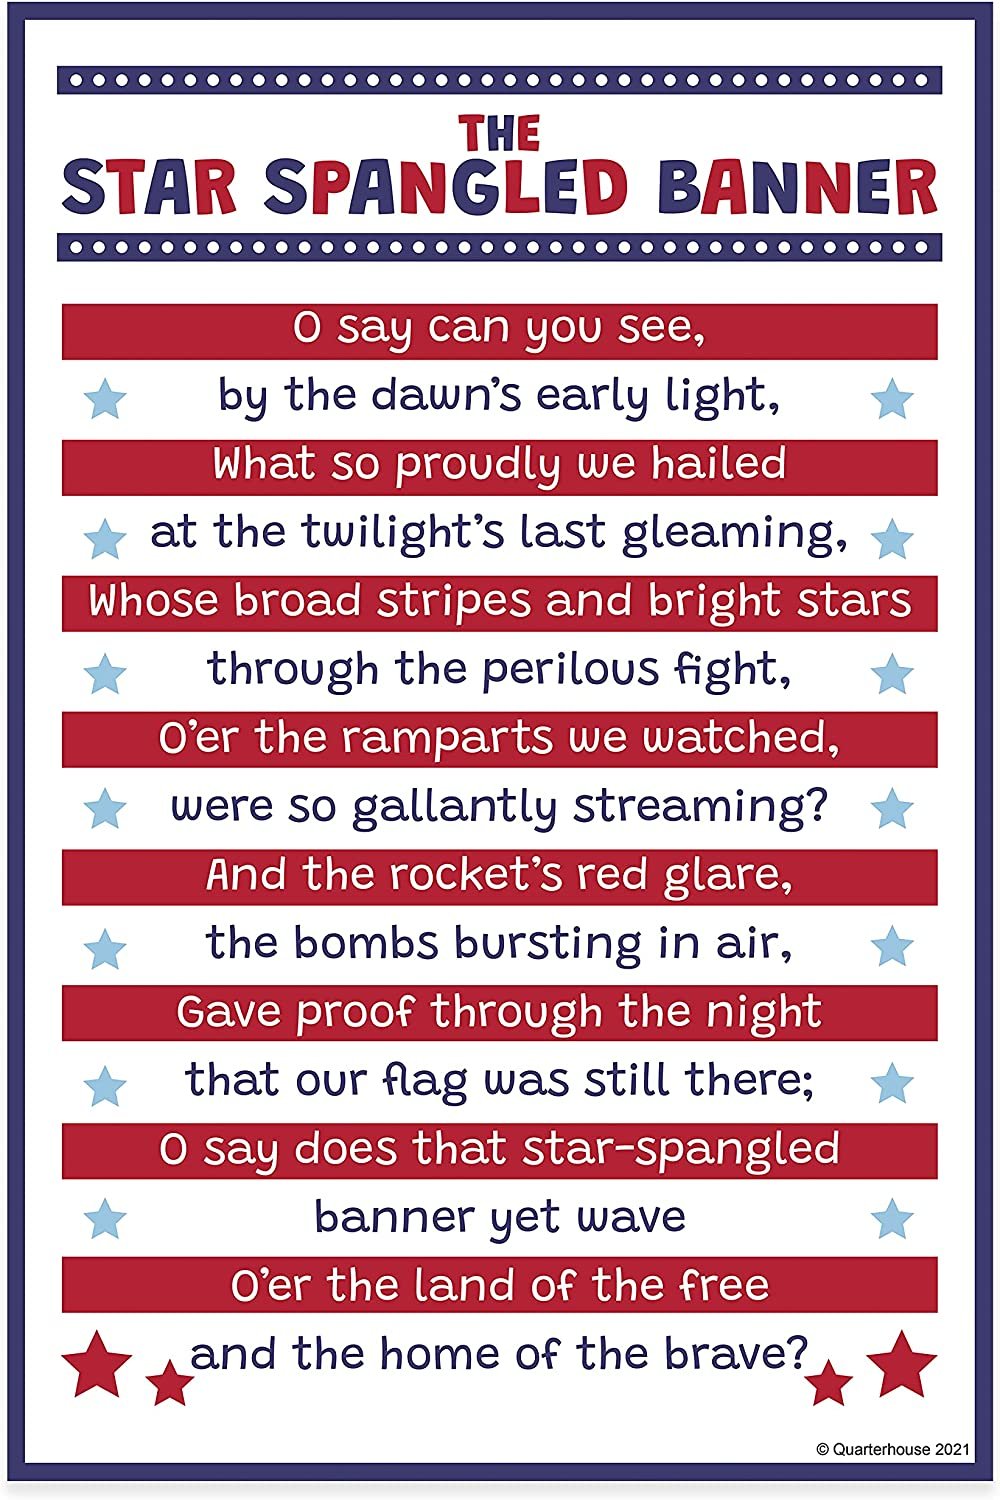 Quarterhouse American Civics and US History Poster Set, Social Studies Classroom Learning Materials for K-12 Students and Teachers, Set of 7, 12 x 18 Inches, Extra Durable